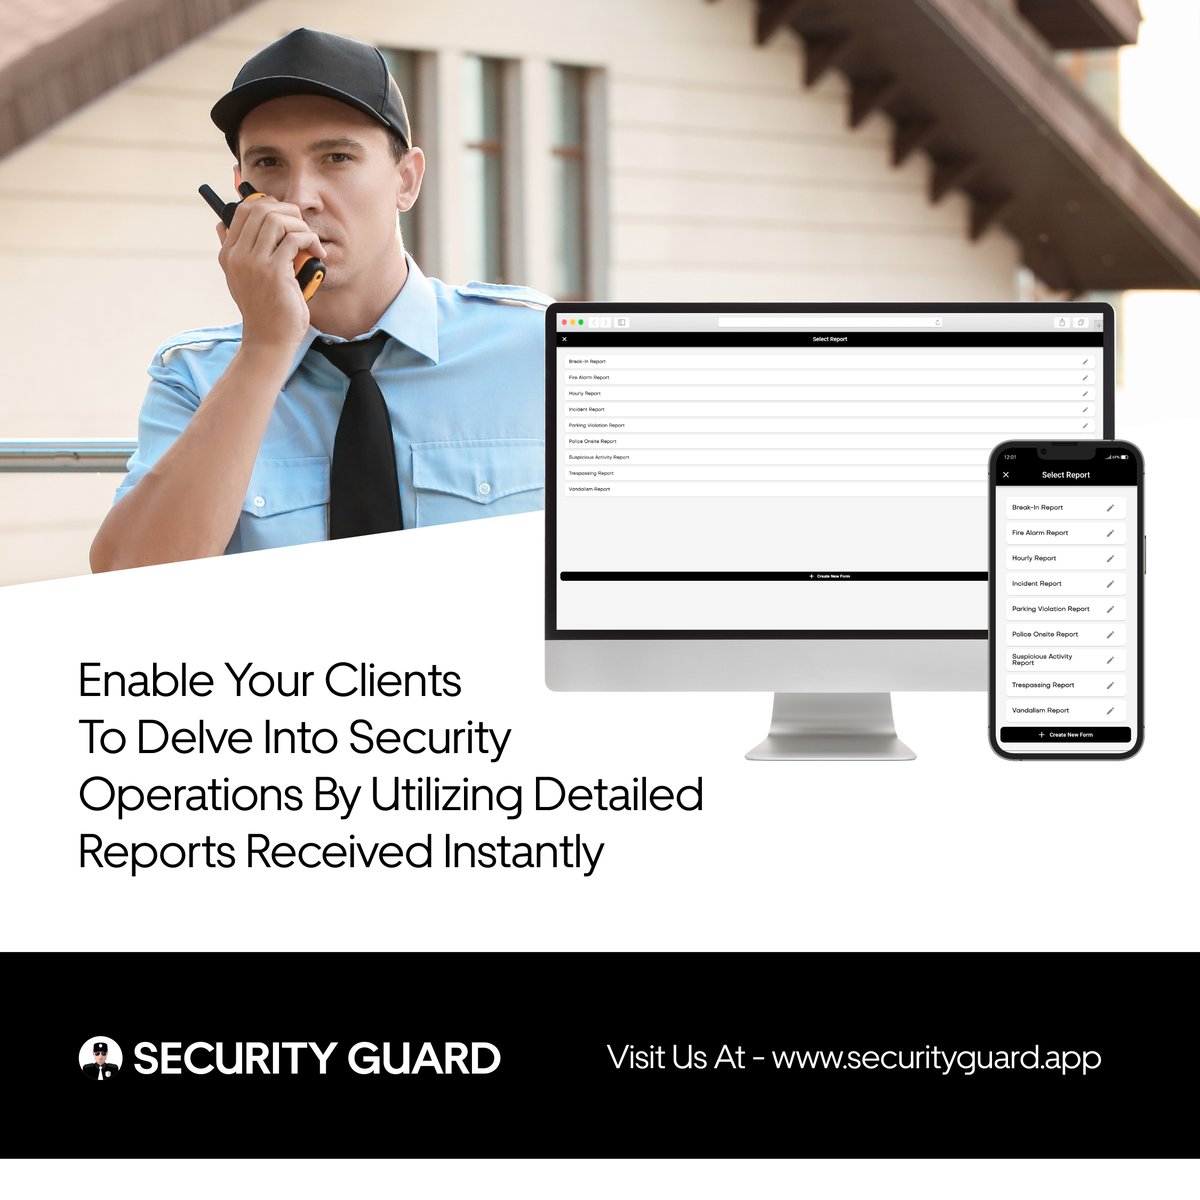 Monitor on-site performance in real-time using the web and #MobileApp of the #SecurityGuardApp, granting complete access to all reports submitted by #SecurityGuards while on patrol.
Explore more here: securityguard.app/reporting

#SecurityServices #SecurityGuardServices #WebApp